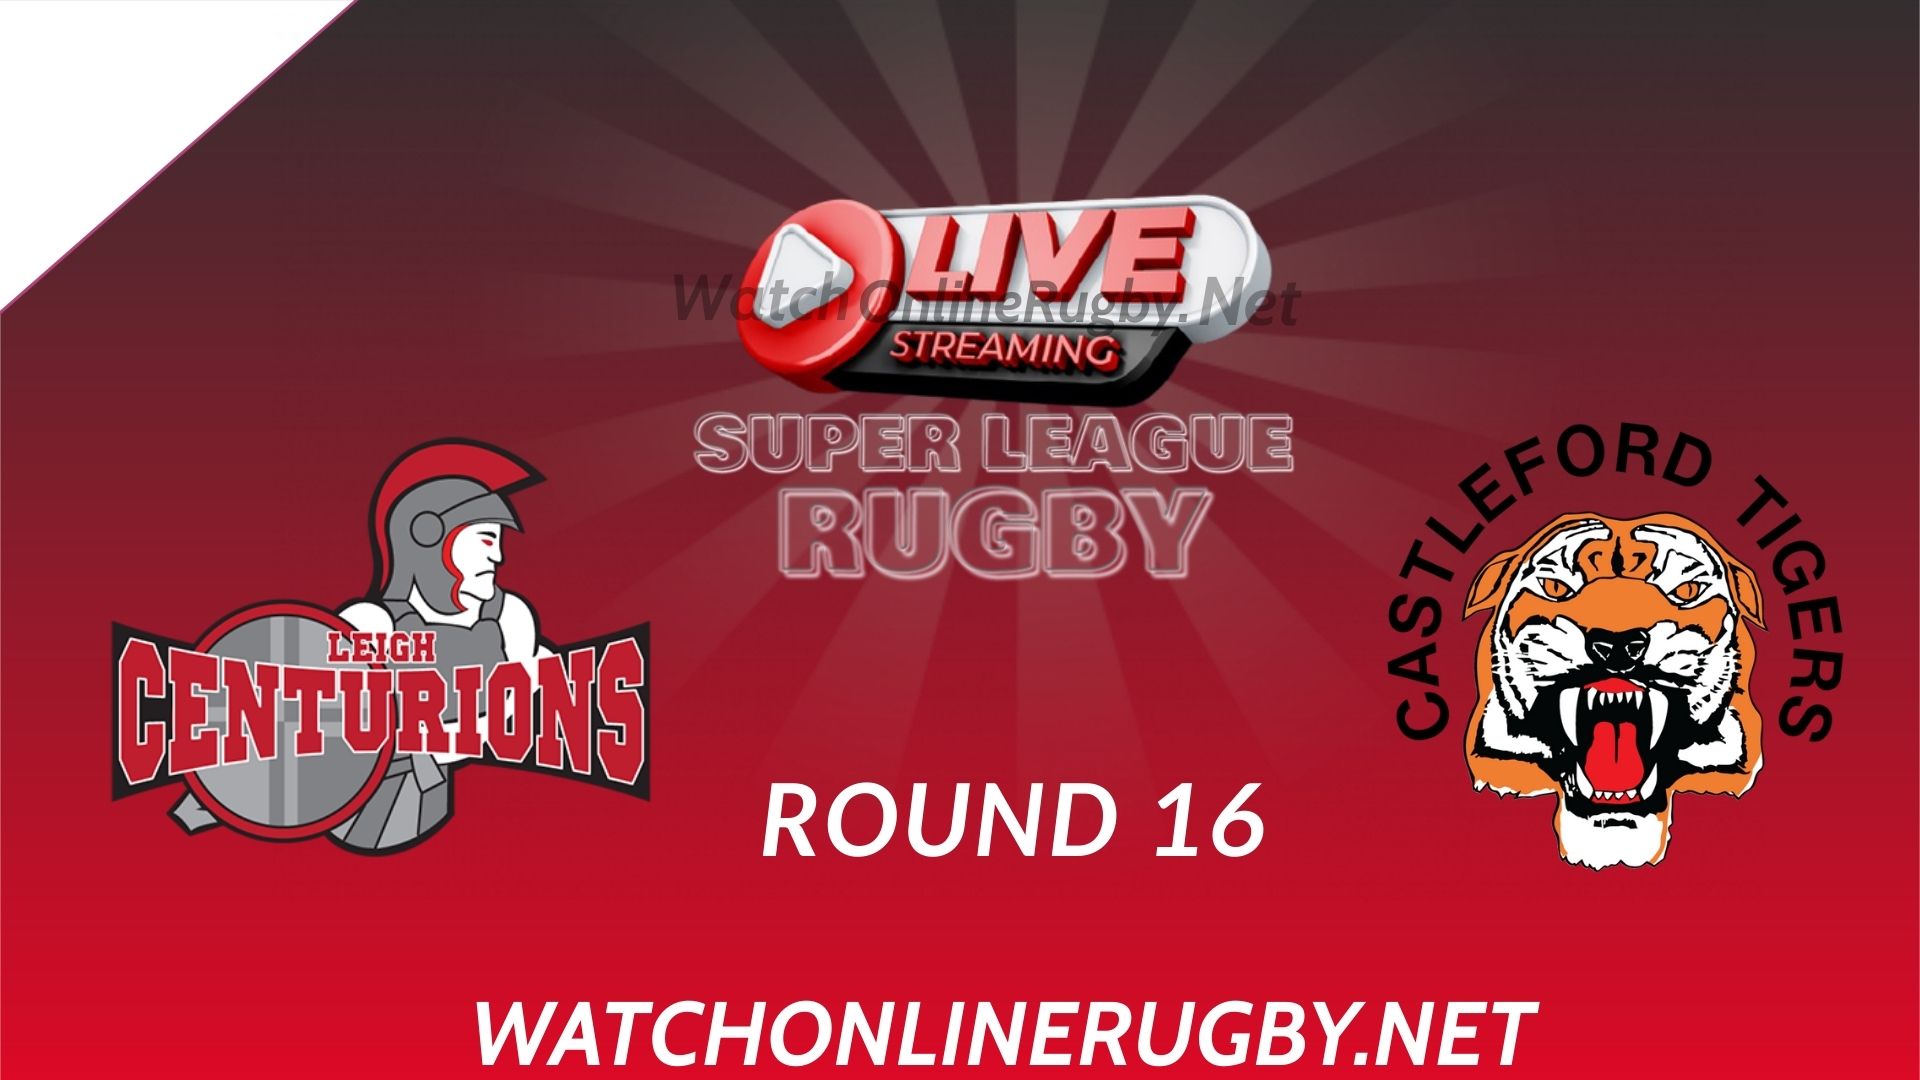 leigh-centurions-vs-castleford-tigers-rugby-hd-live